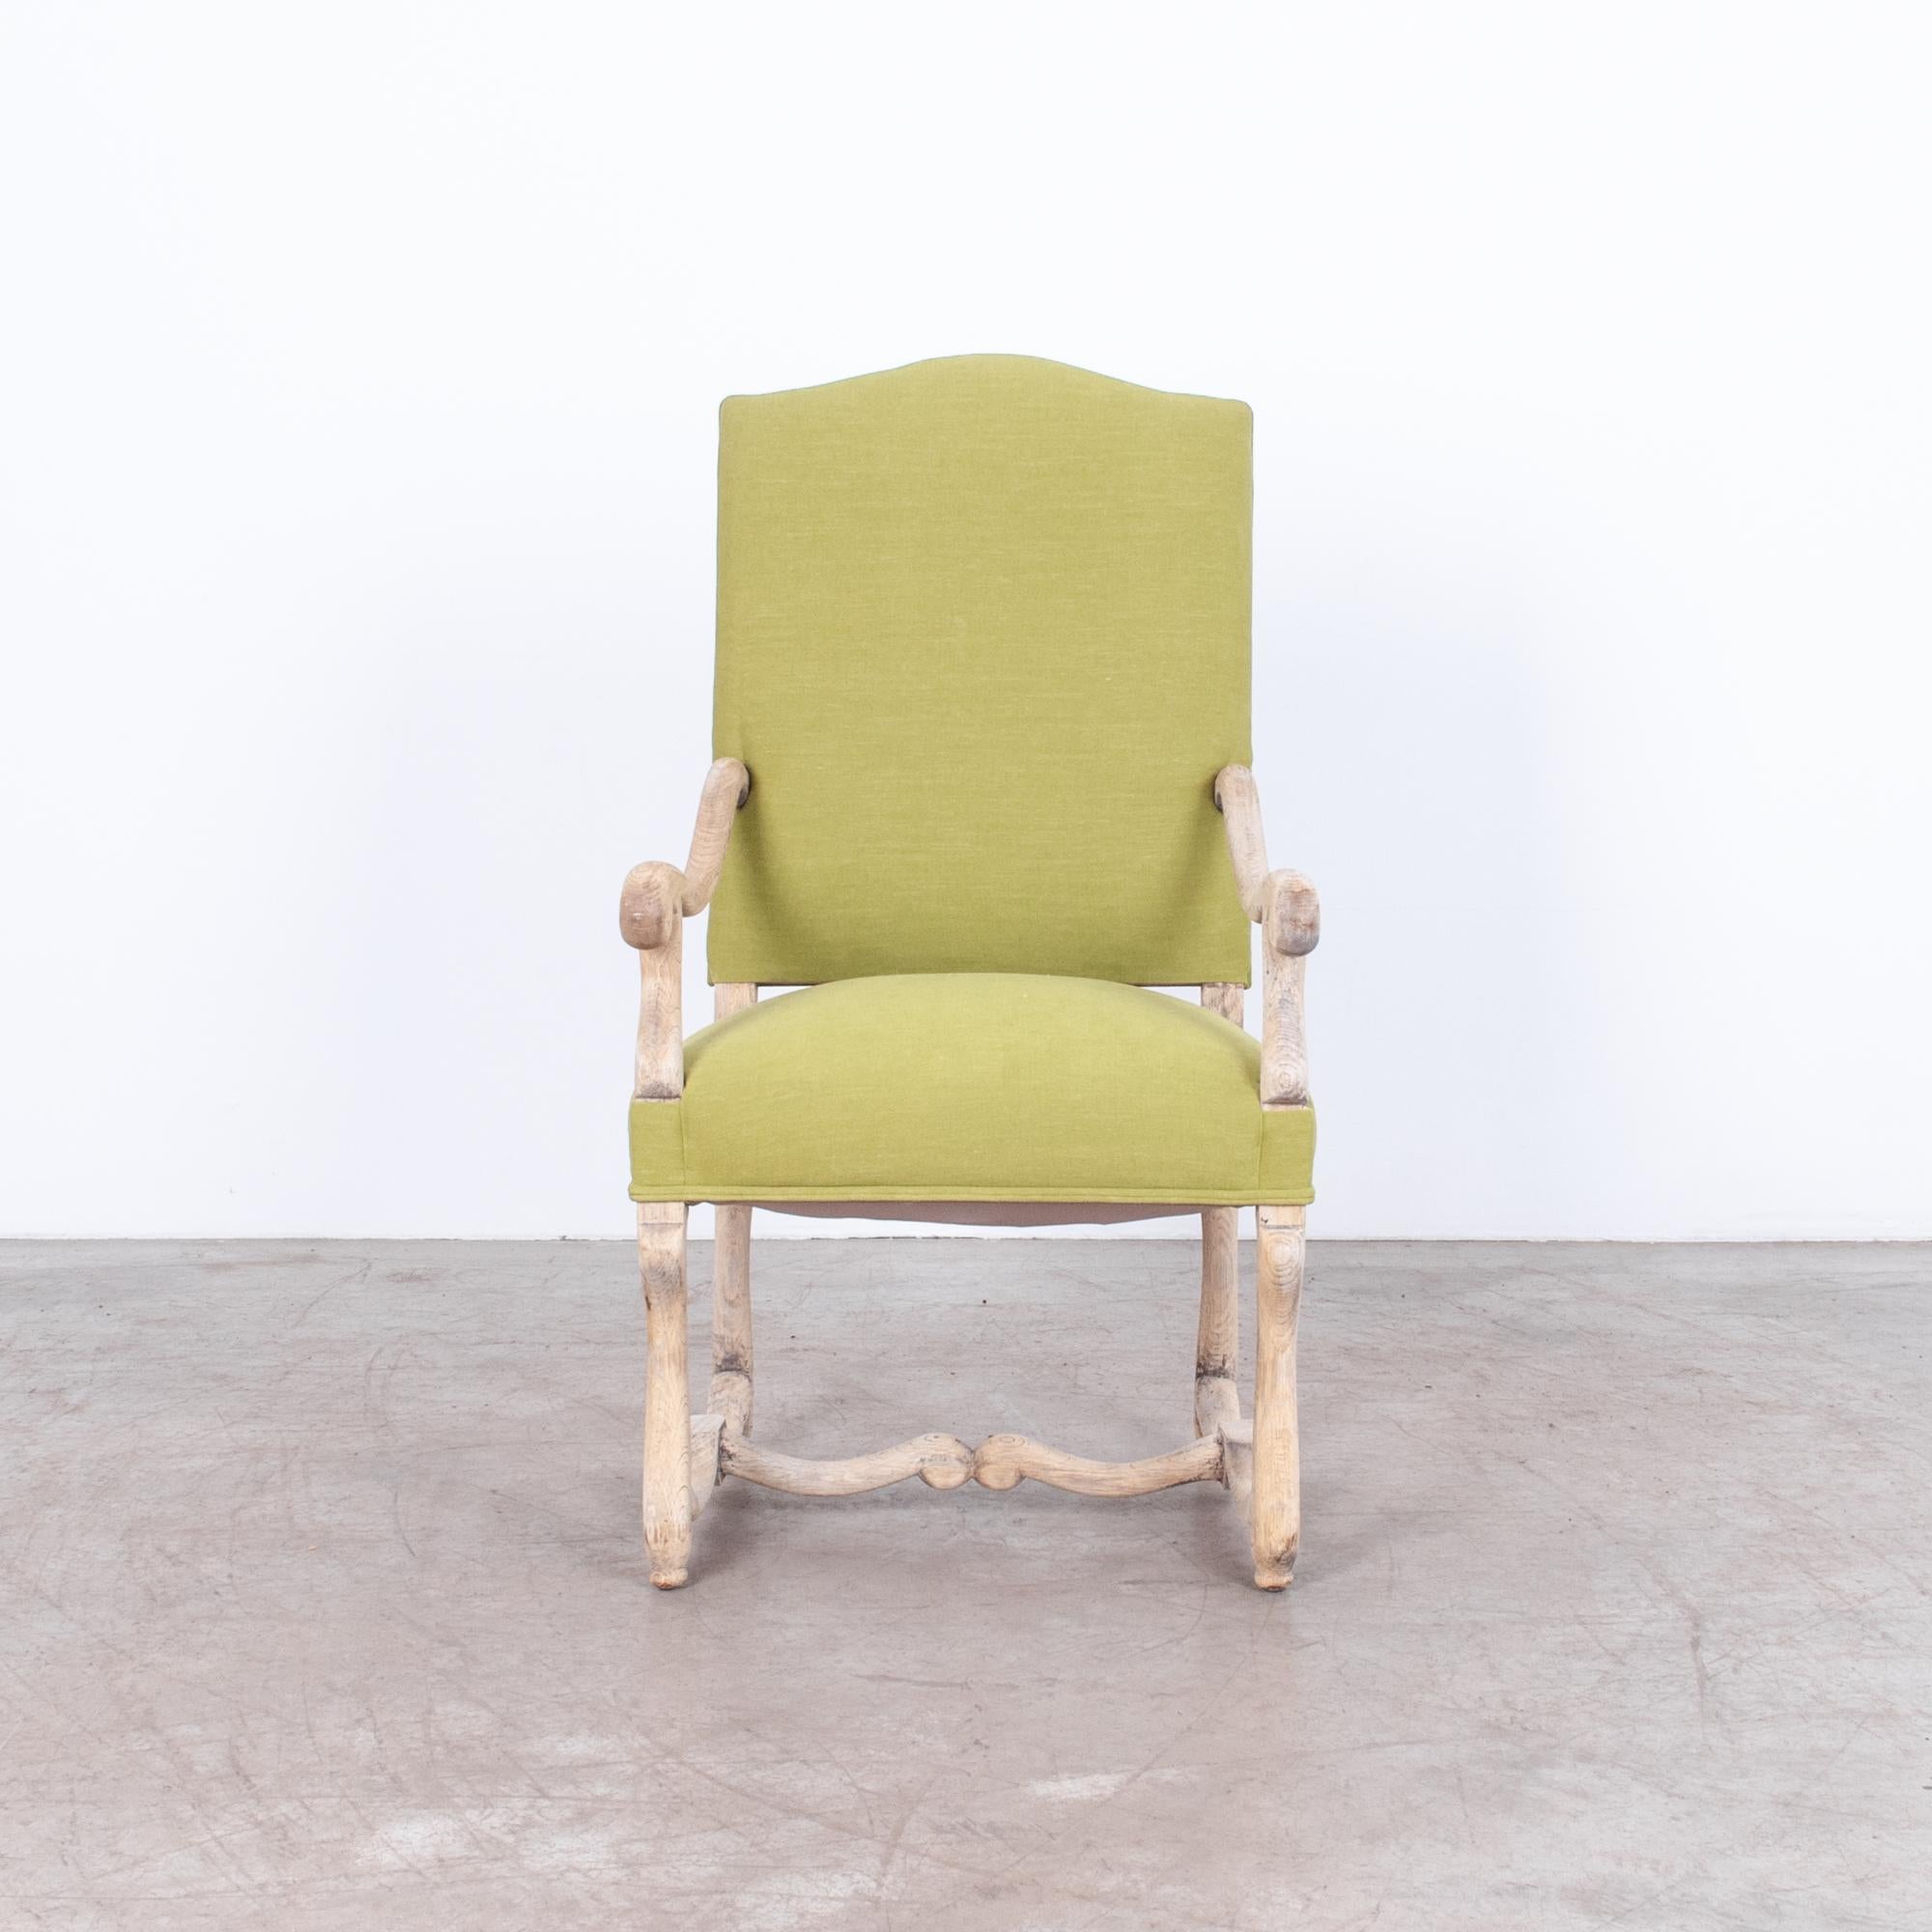 Ornate upholstered armchair from Belgium, circa 1940. A distinctive “os de mouton” shape, called after the “bone of the sheep,” in naturally finished oak. With a striking green updated upholstery, this chair is fitted for contemporary interiors,